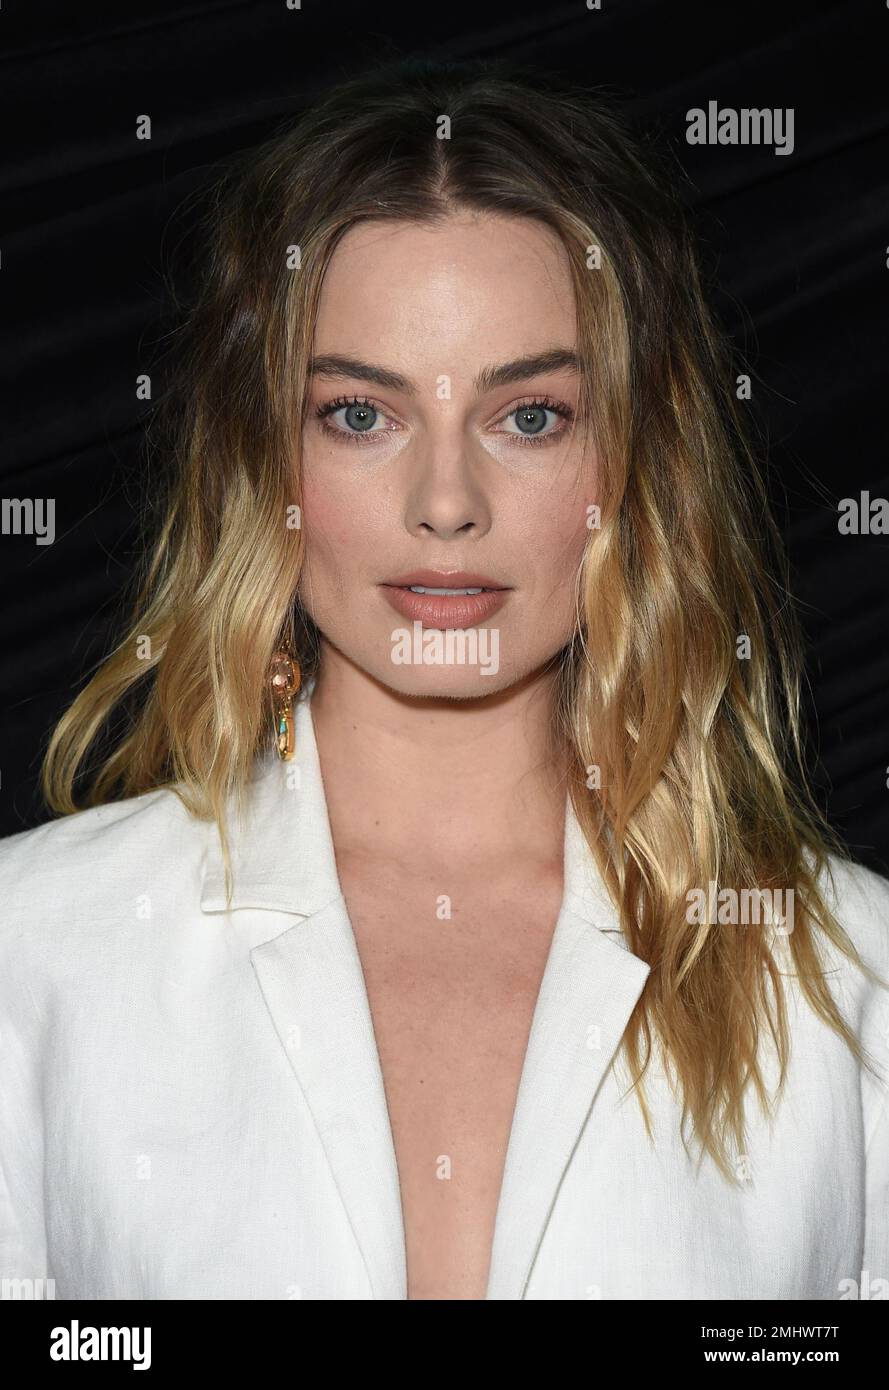 Cast member Margot Robbie, who plays Kayla Pospisil, poses at a Los ...